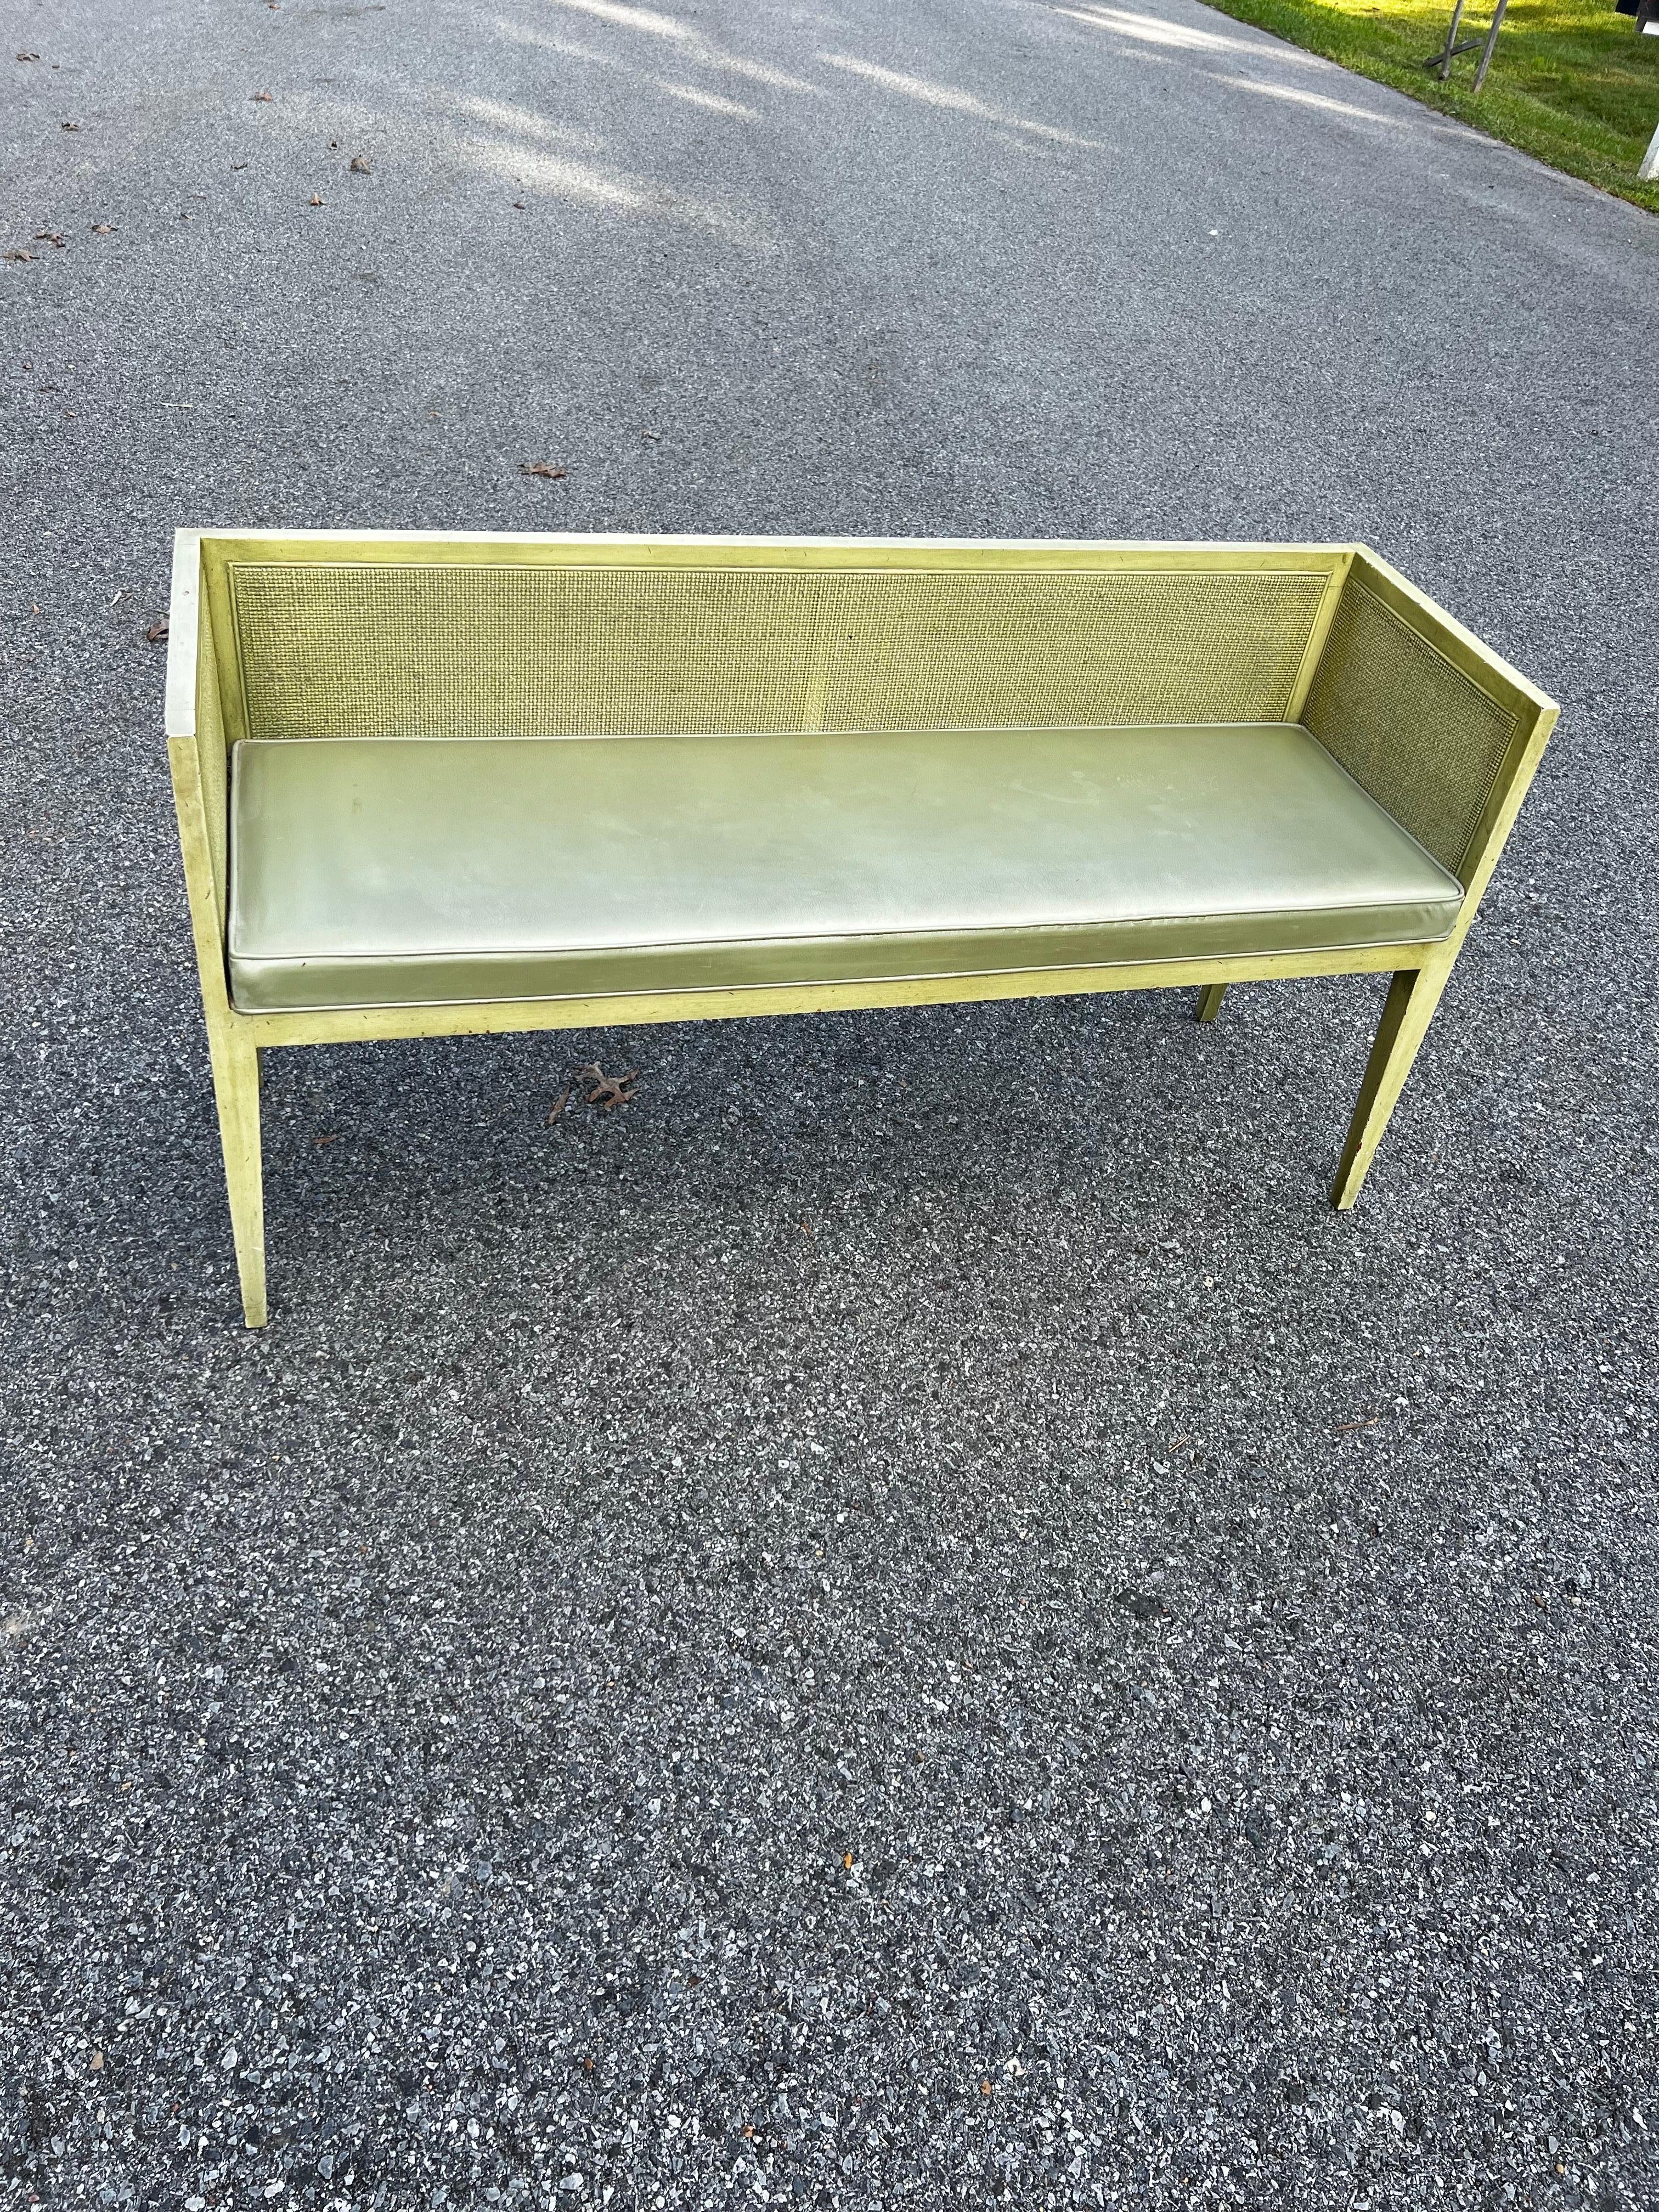 Hand-Crafted Mid-Century Modern Wood and Cane Green Naugahyde Bench